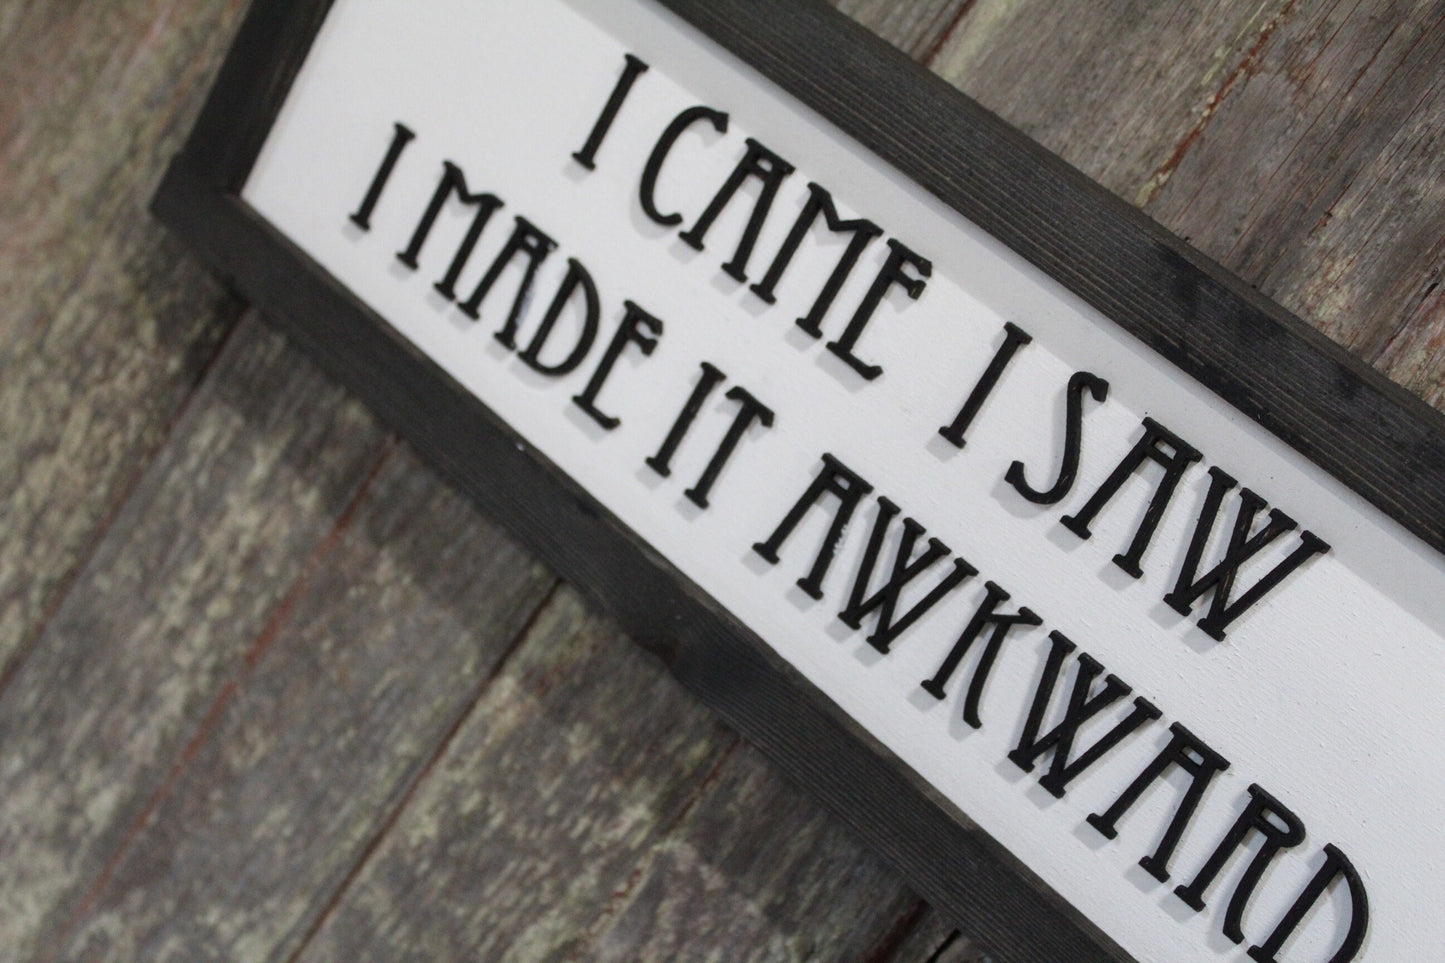 I Came I Saw I Made It Awkward Silly Wood Sign 3D Raised Text Comedic Gift Socially Awkward Introvert Rustic Handmade Farmhouse Sign